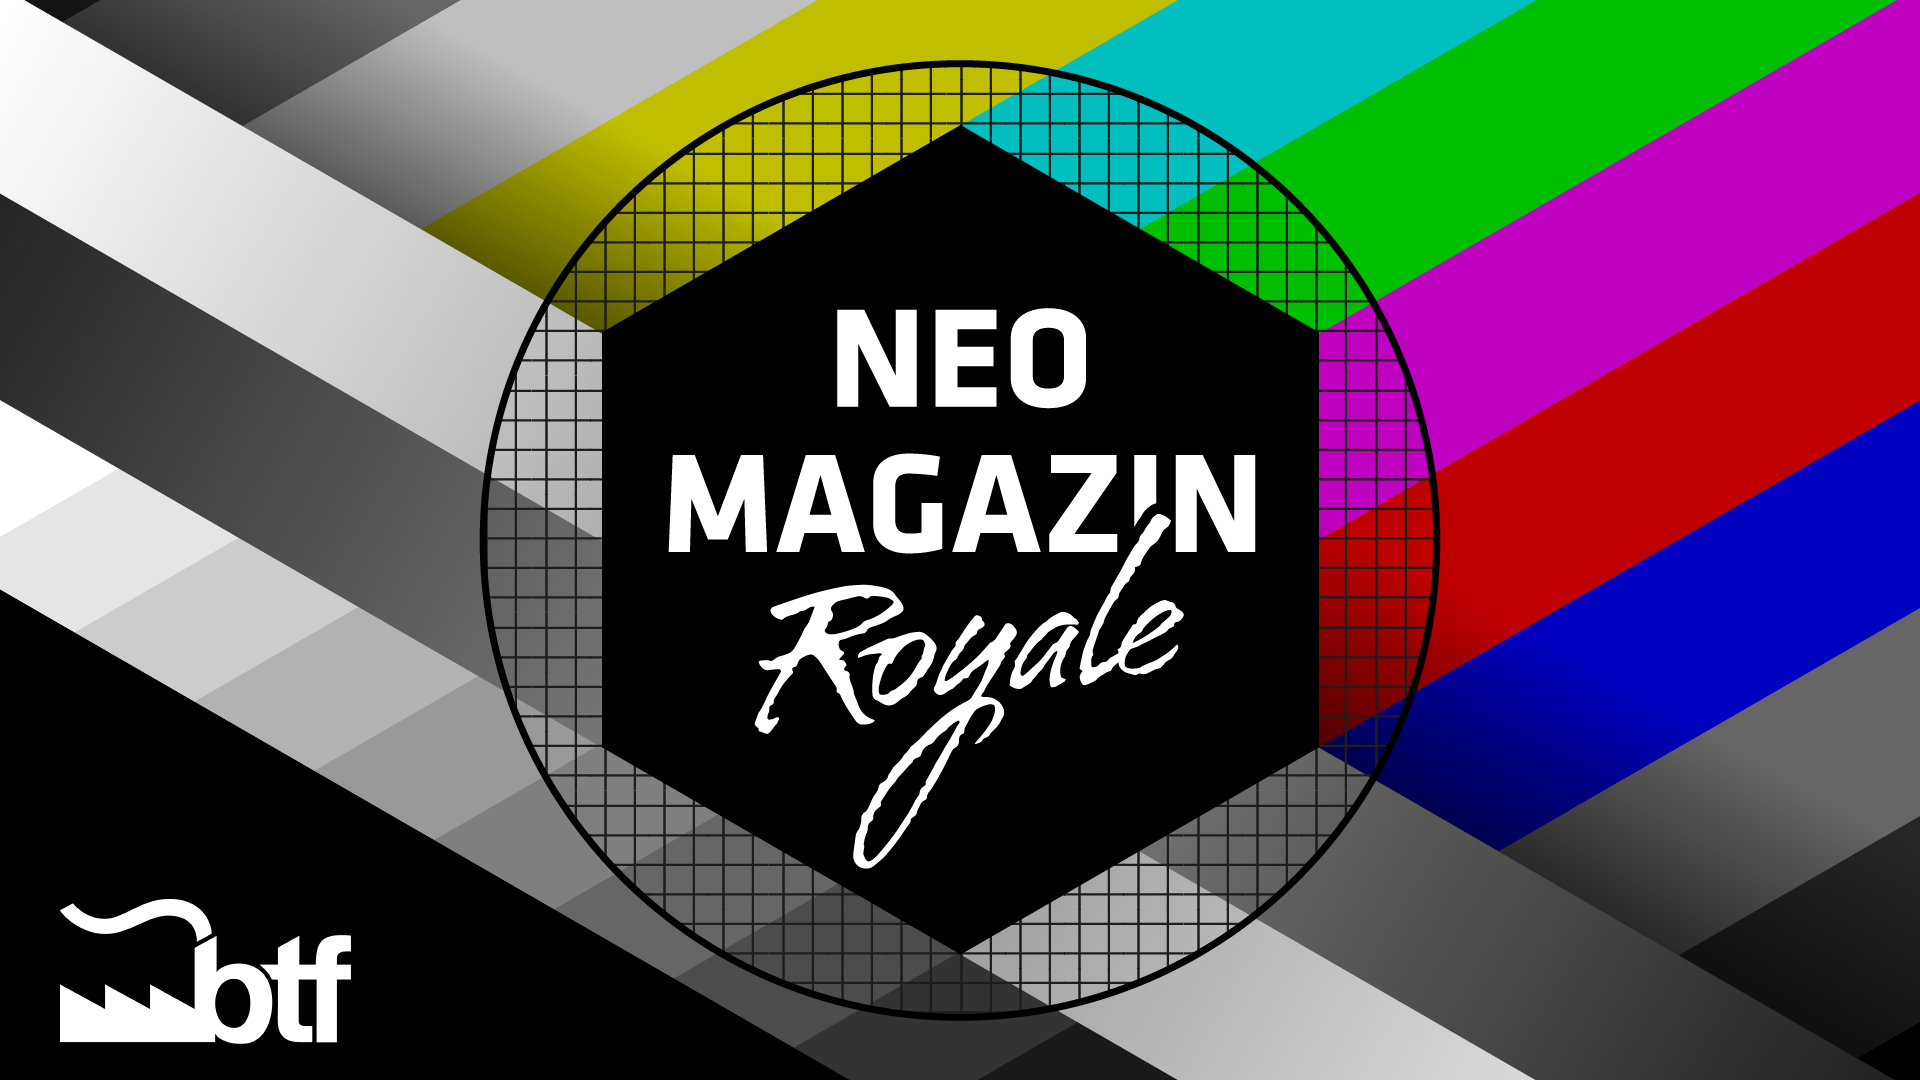 TV testimage with 'Neo Magazine Royale' logo in center